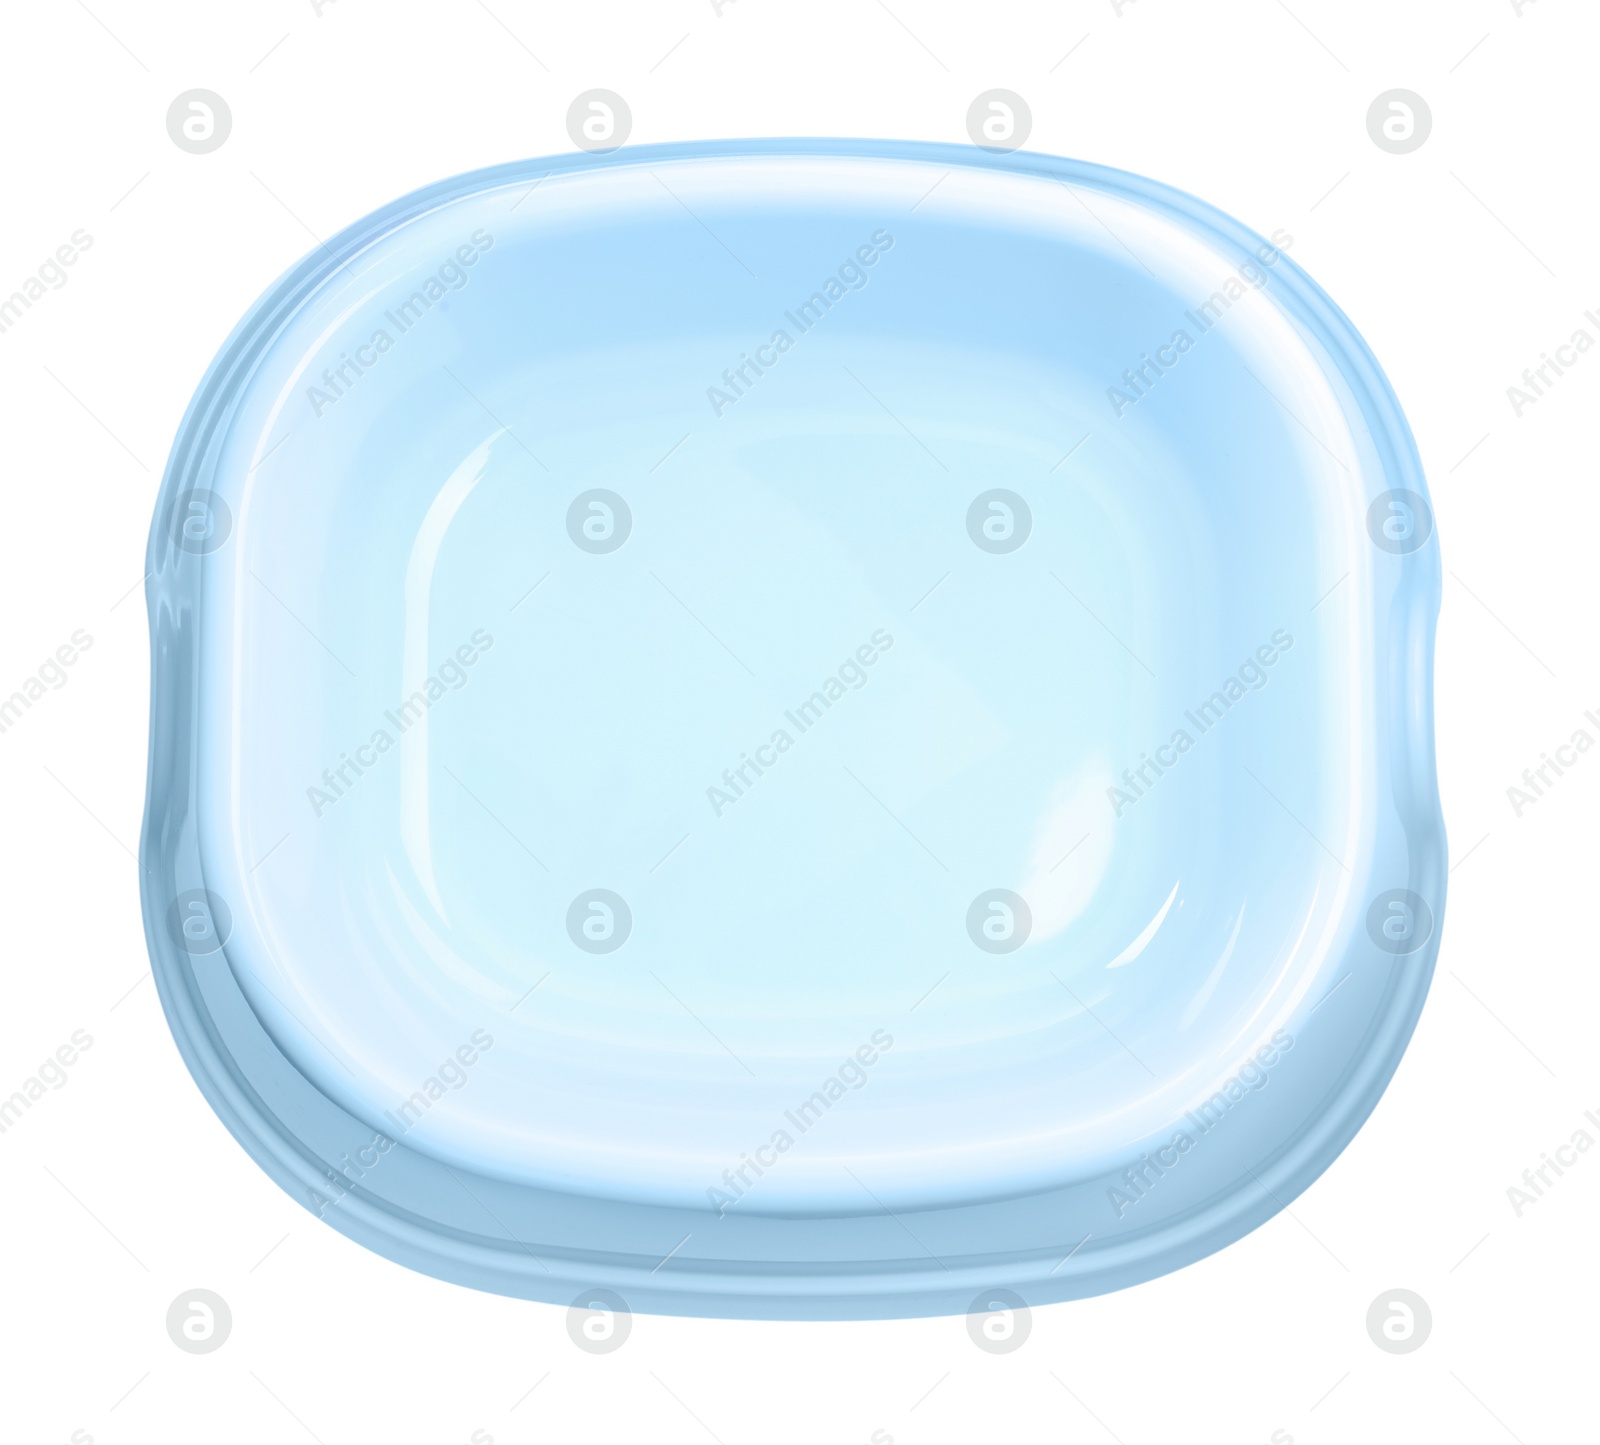 Photo of Feeding bowl isolated on white, top view. Pet care